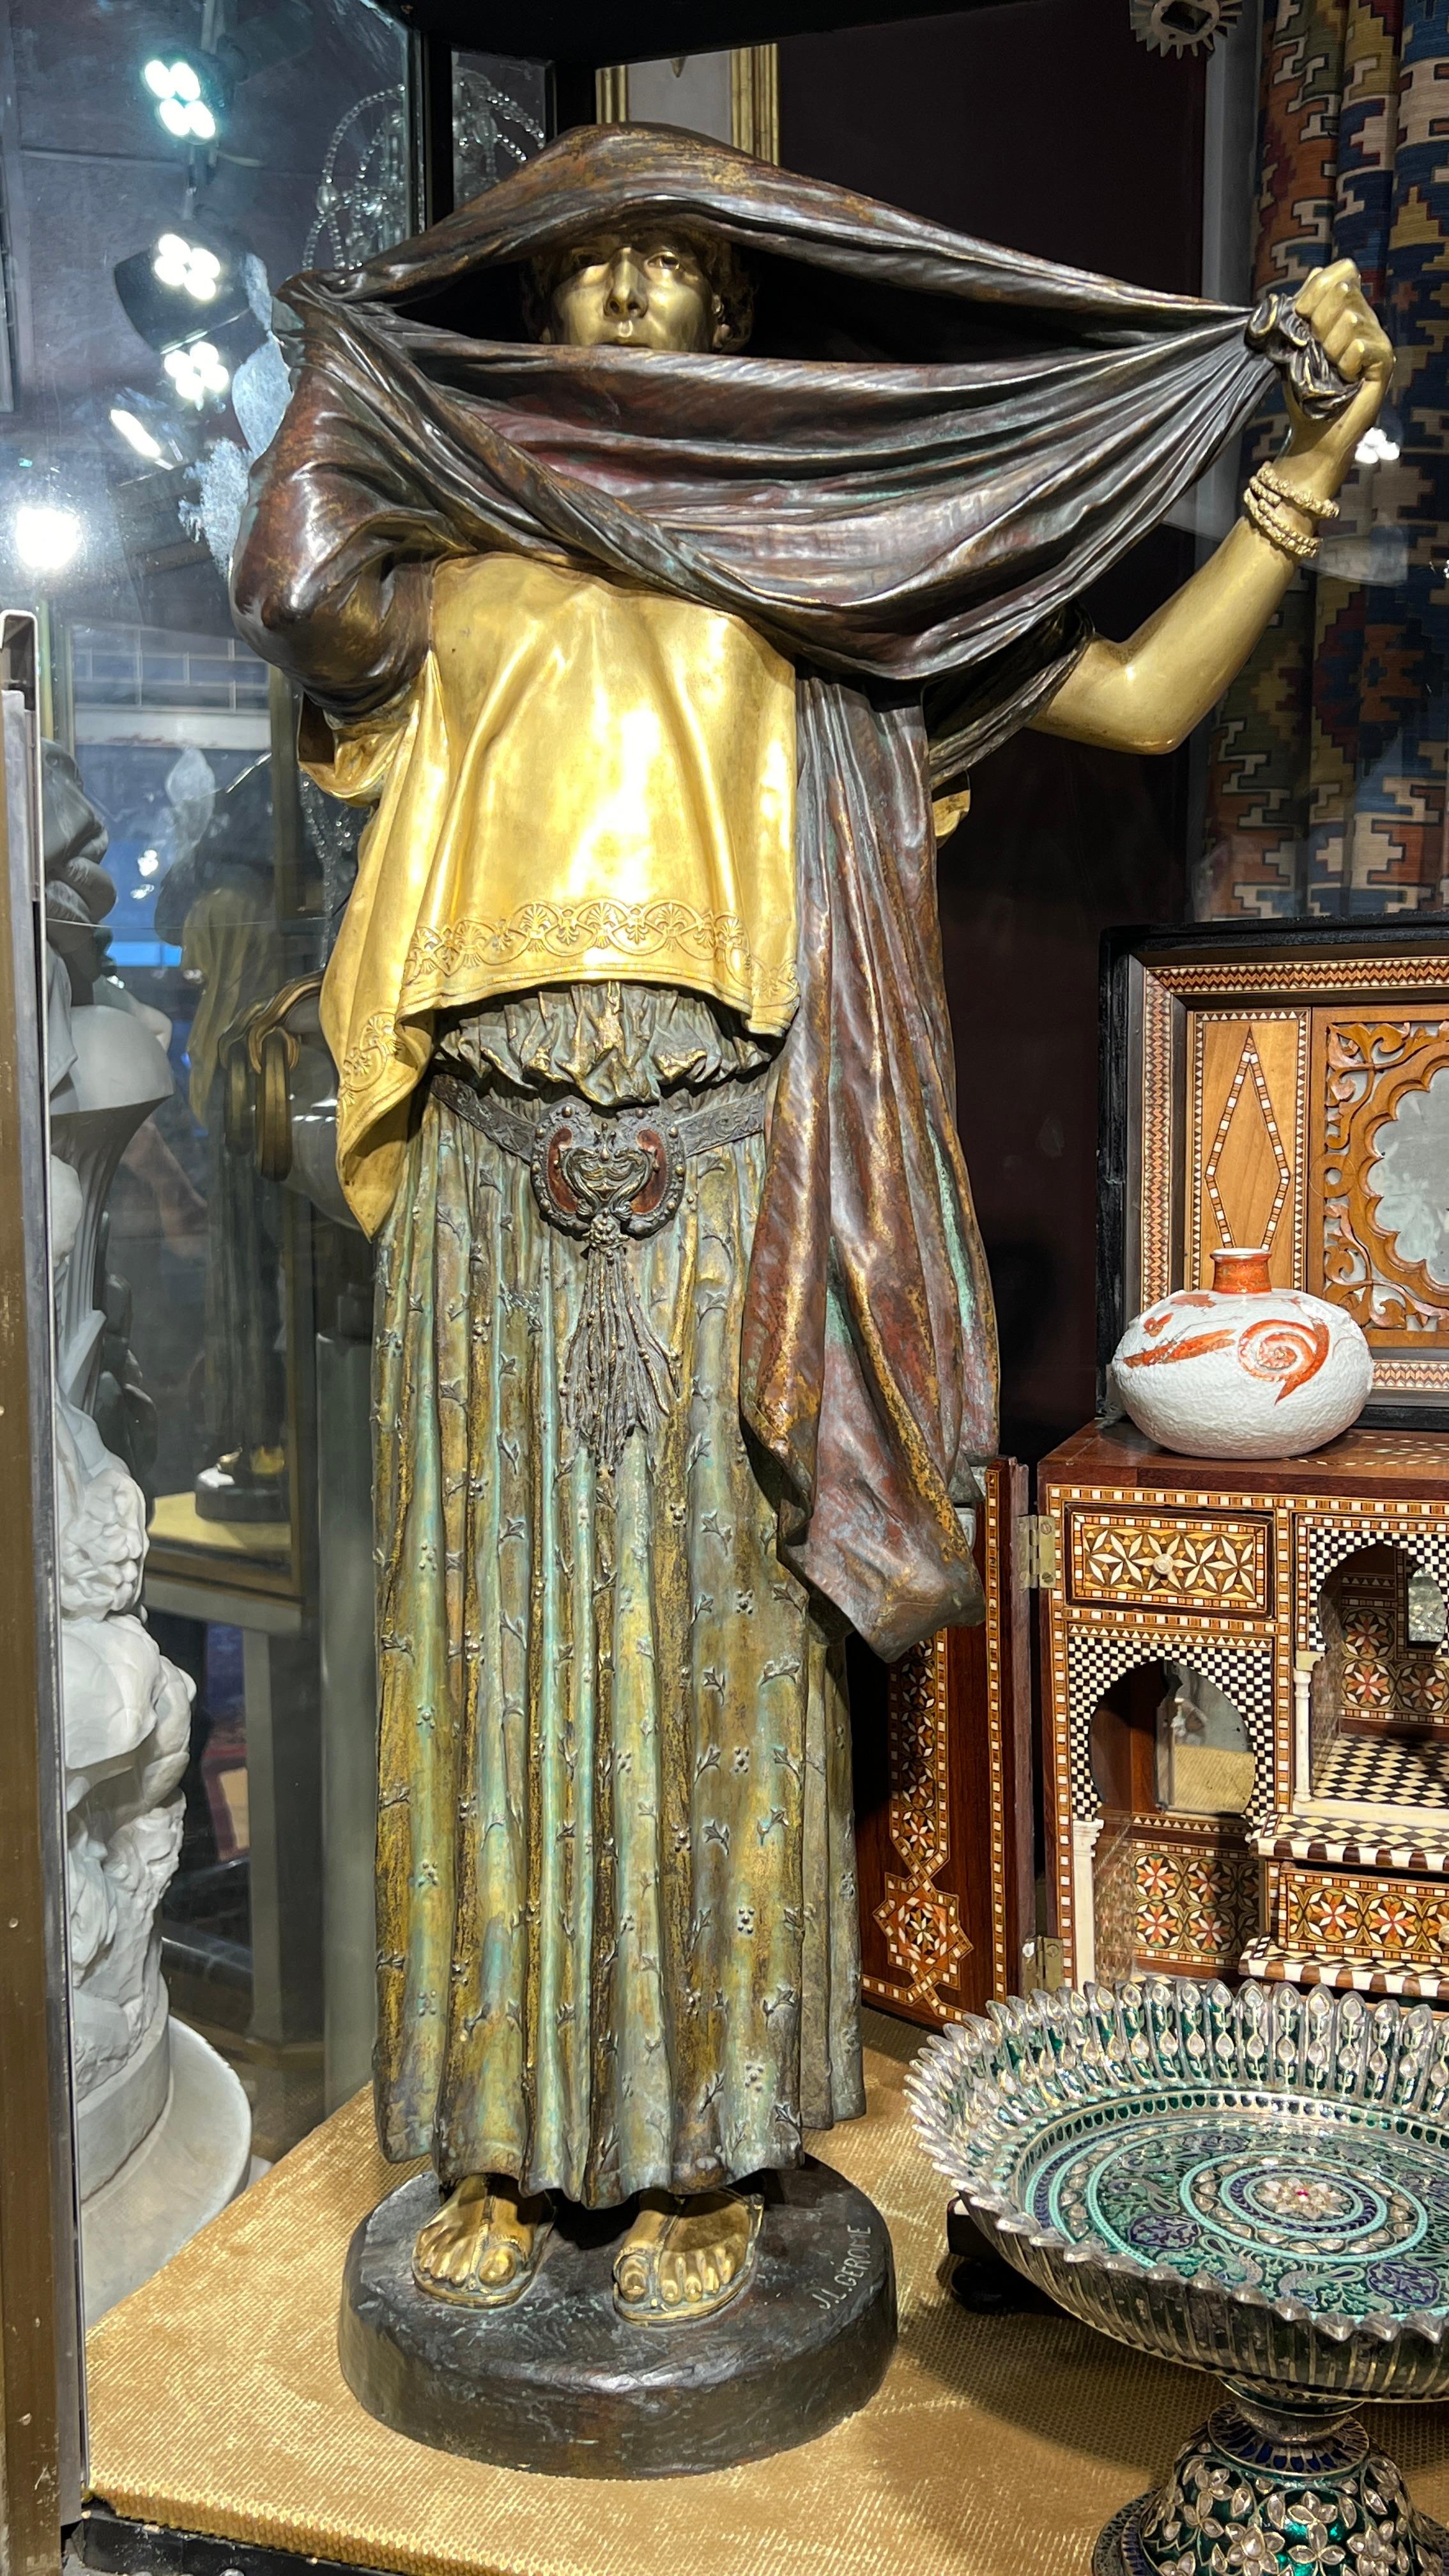 Our bronze statue of La Femme au Voile (Woman with Veil) was cast by Siot Decauville of Paris after the original model by Jean Leon Gerome (1824-1904).  33 3/4 inches (85.7 cm) tall with fine patina and partially gilt surfaces, it is the largest